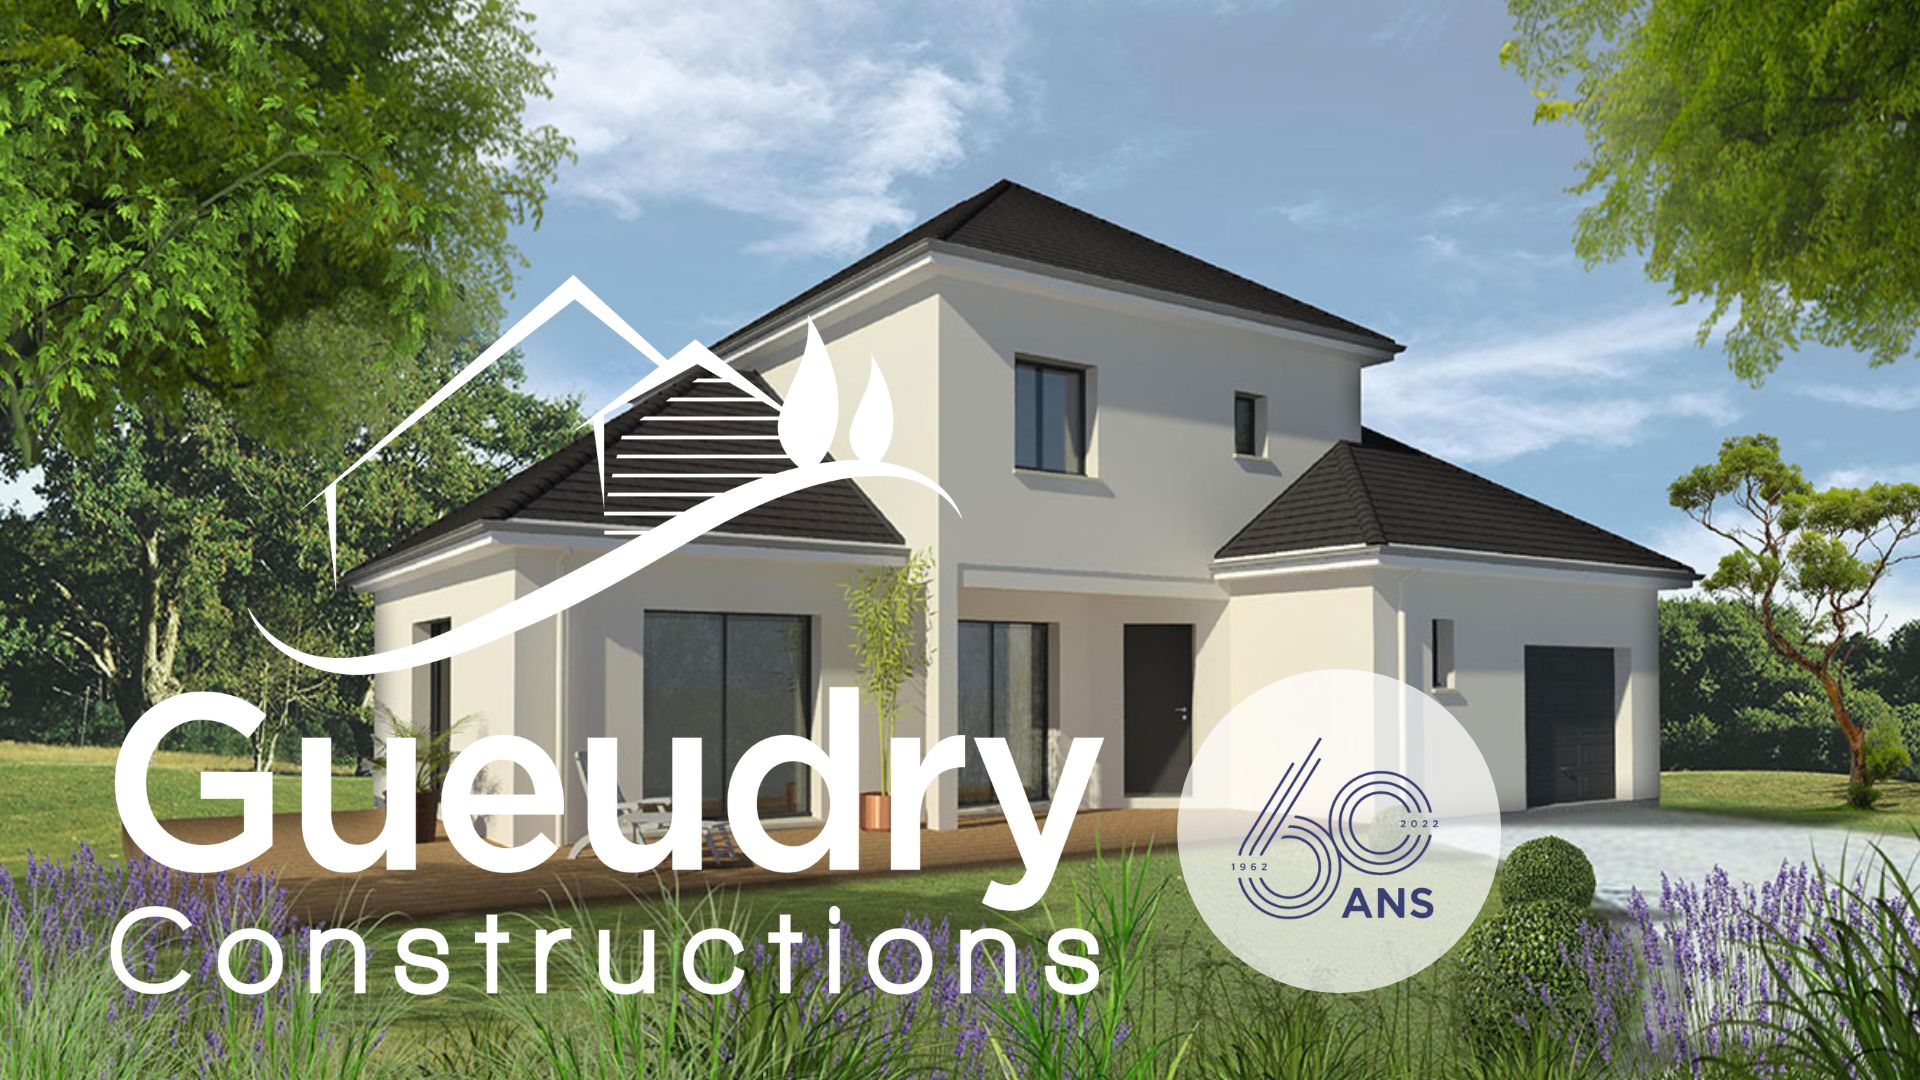 Gueudry constructions ans